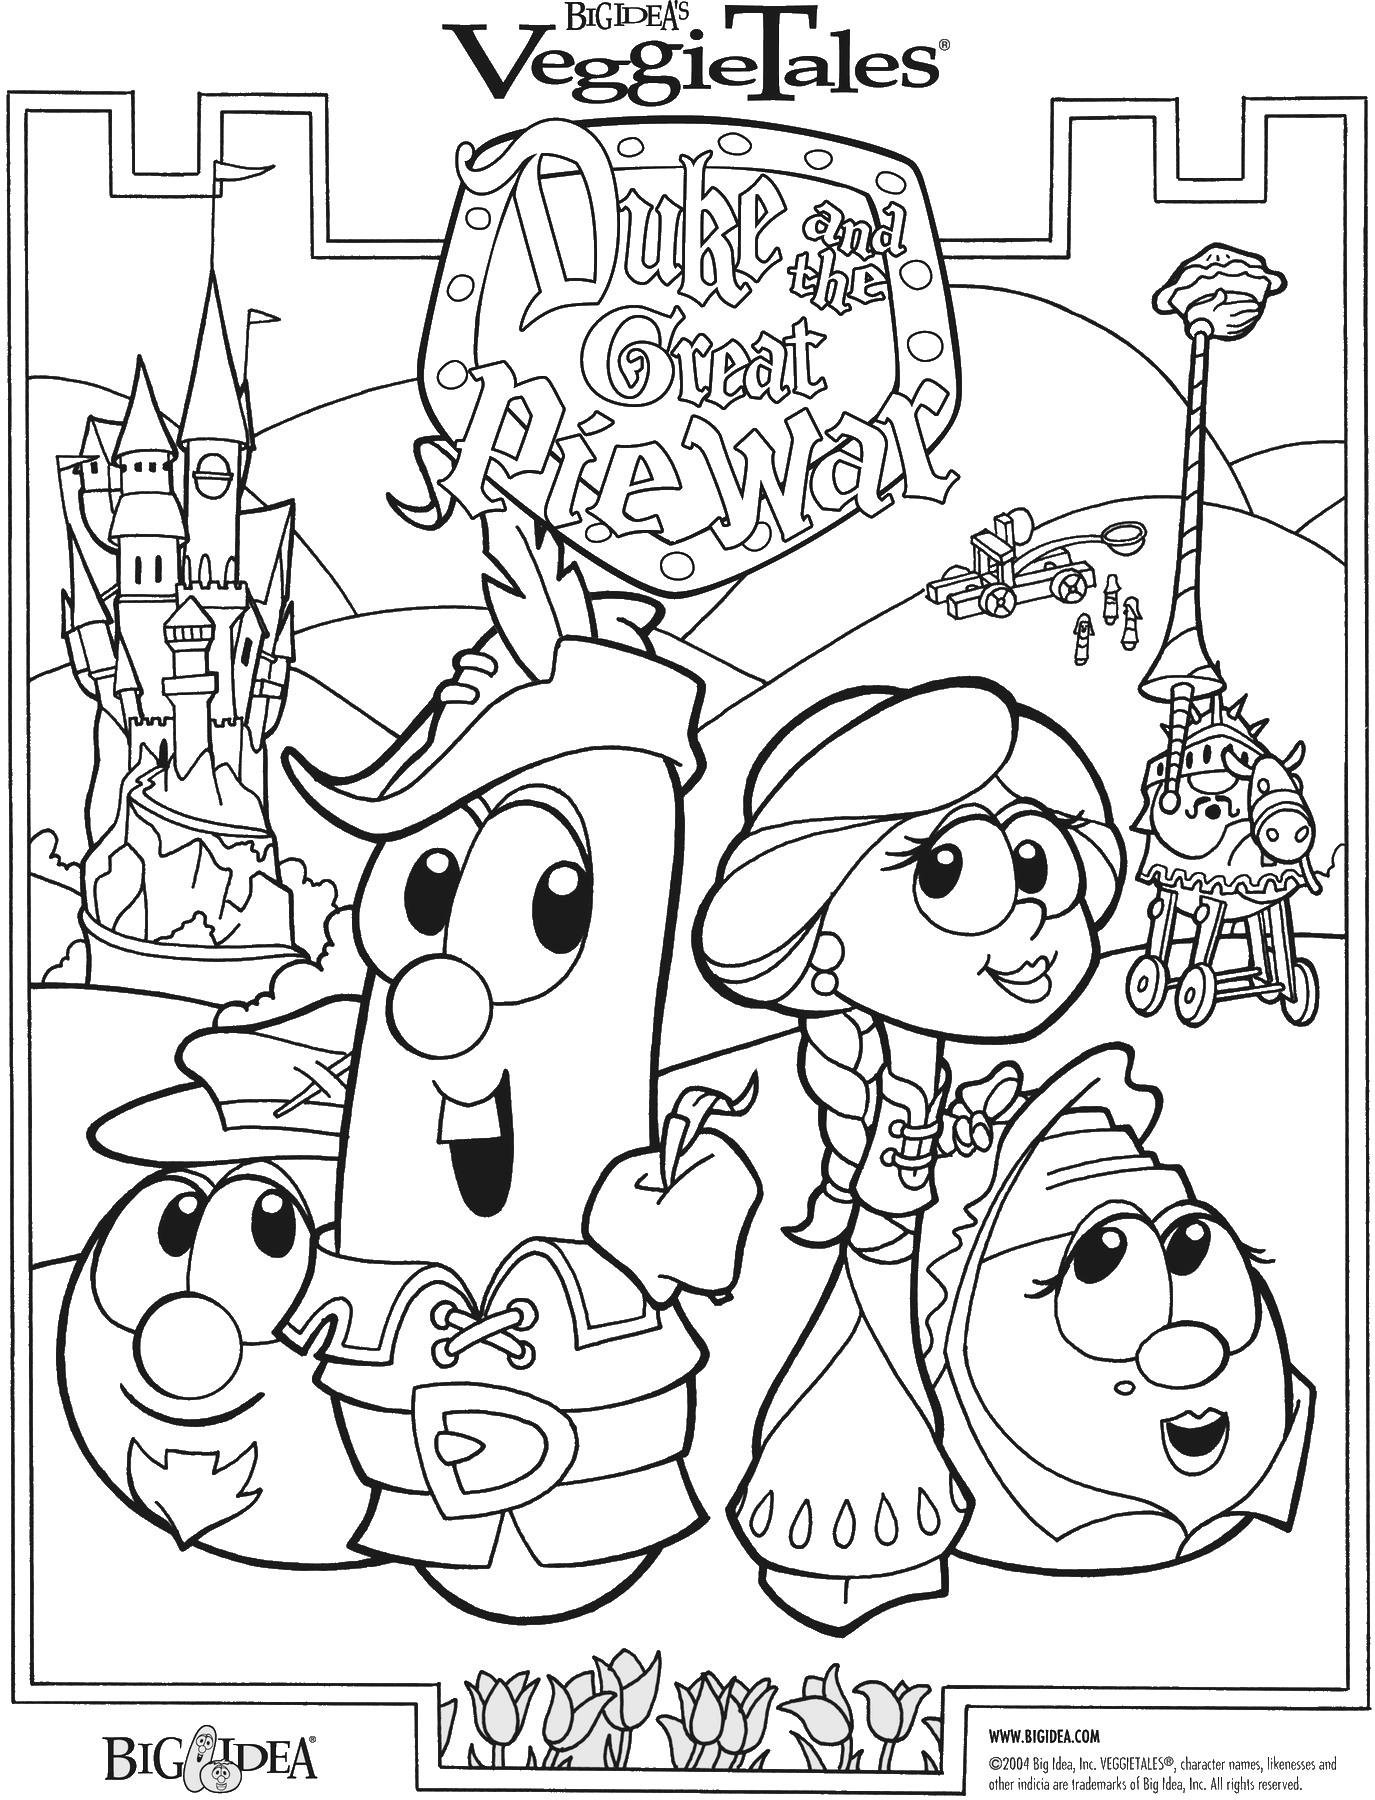 veggie-tales-coloring-pages